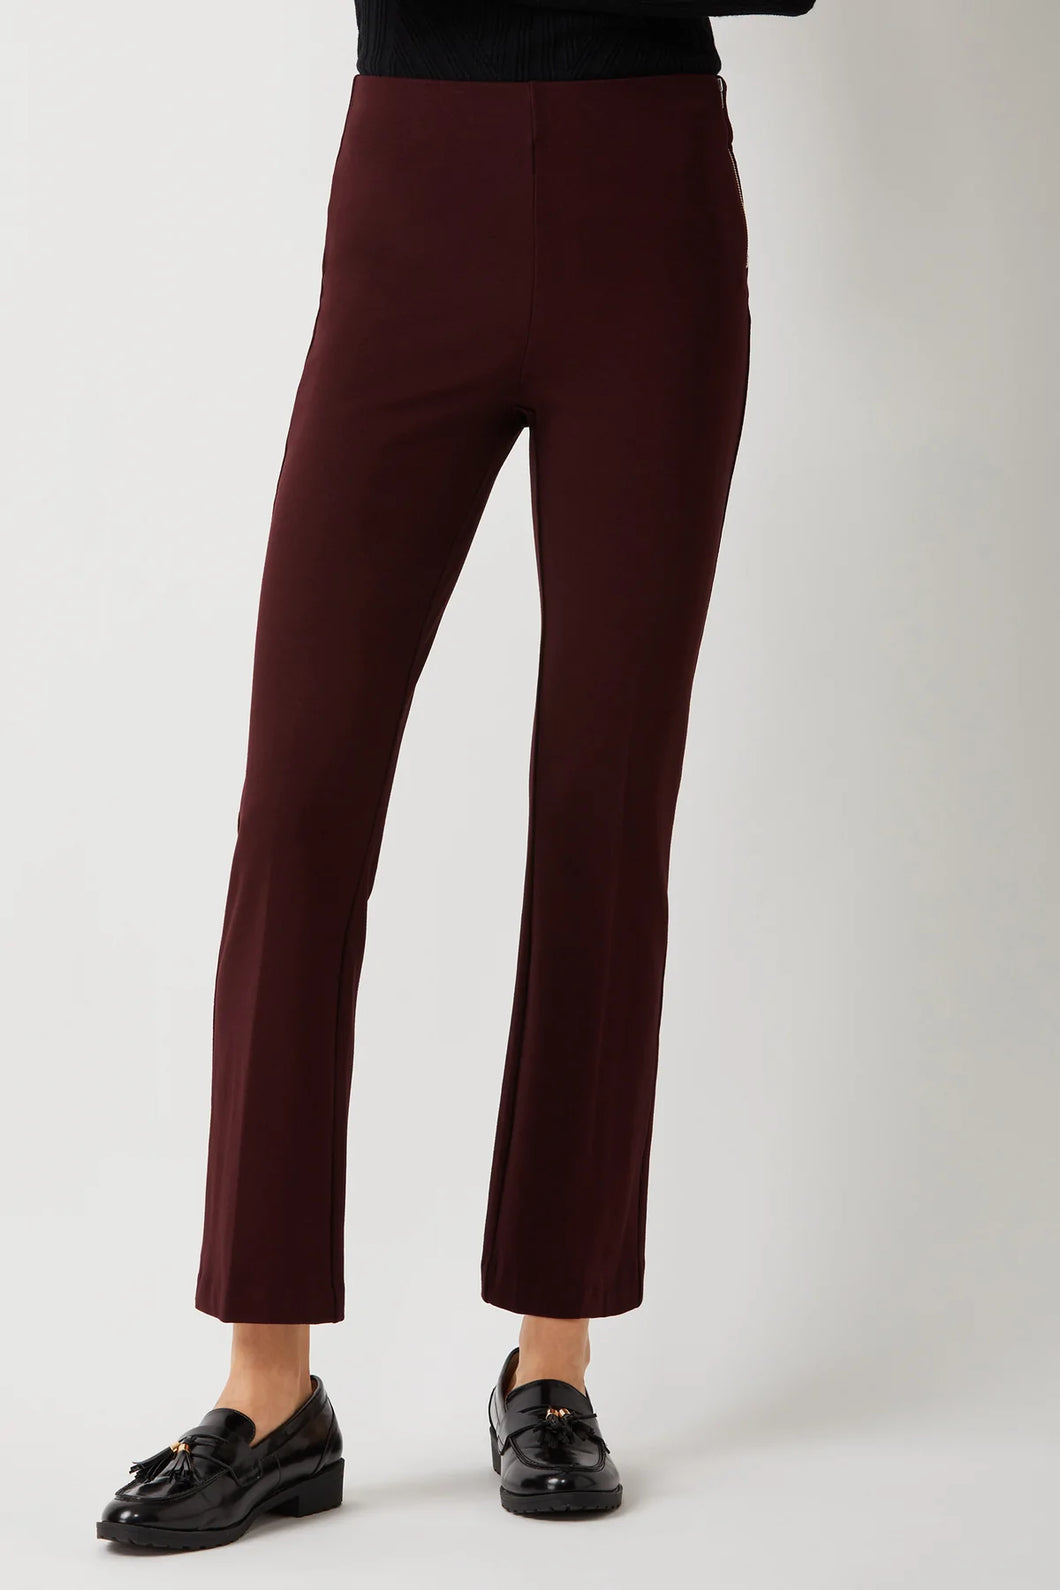 PRINCE CROPPED FLARE LEG PANT IN BURGUNDY